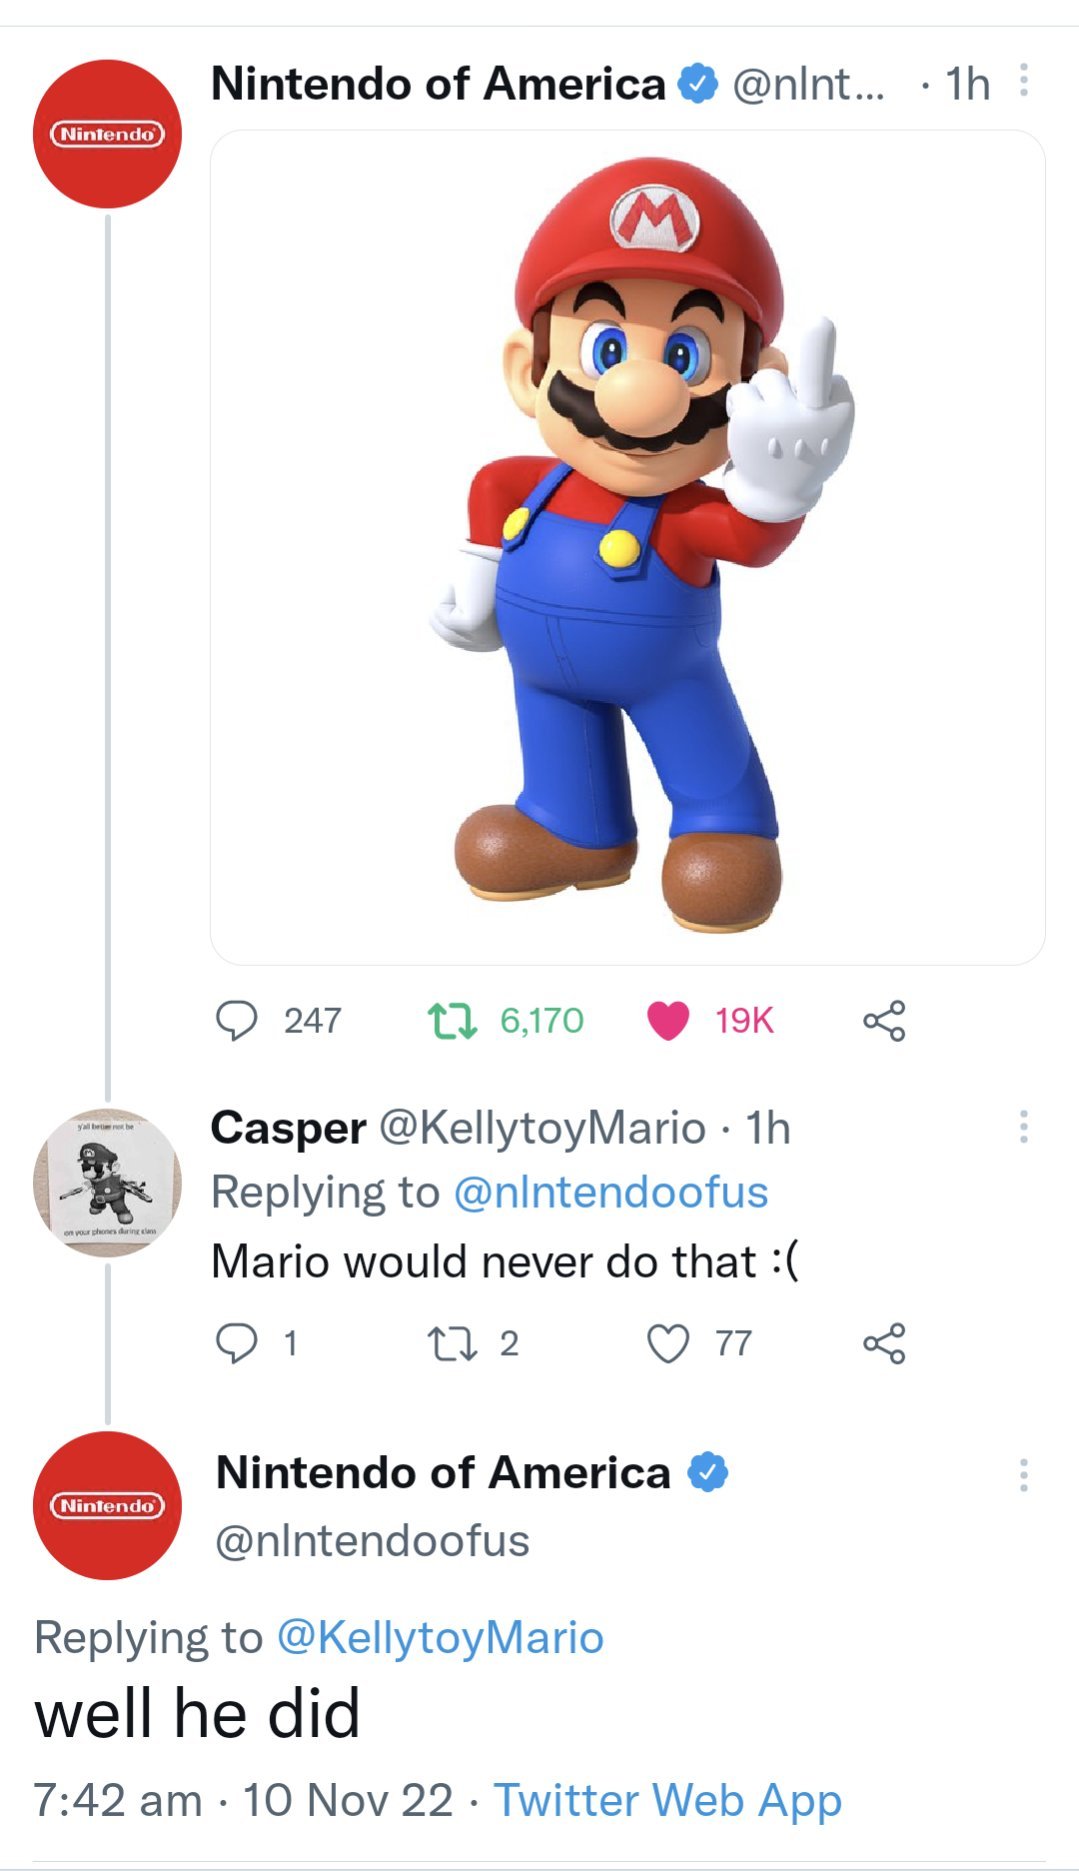 fake twitter posts - mario bros - Nintendo yall be not be on your phones during clas Nintendo Nintendo of America nt... 1h 247 16,170 Casper . 1h Mario would never do that 01 27 2 Nintendo of America well he did 19K 10 Nov 22 Twitter Web App 77 L L